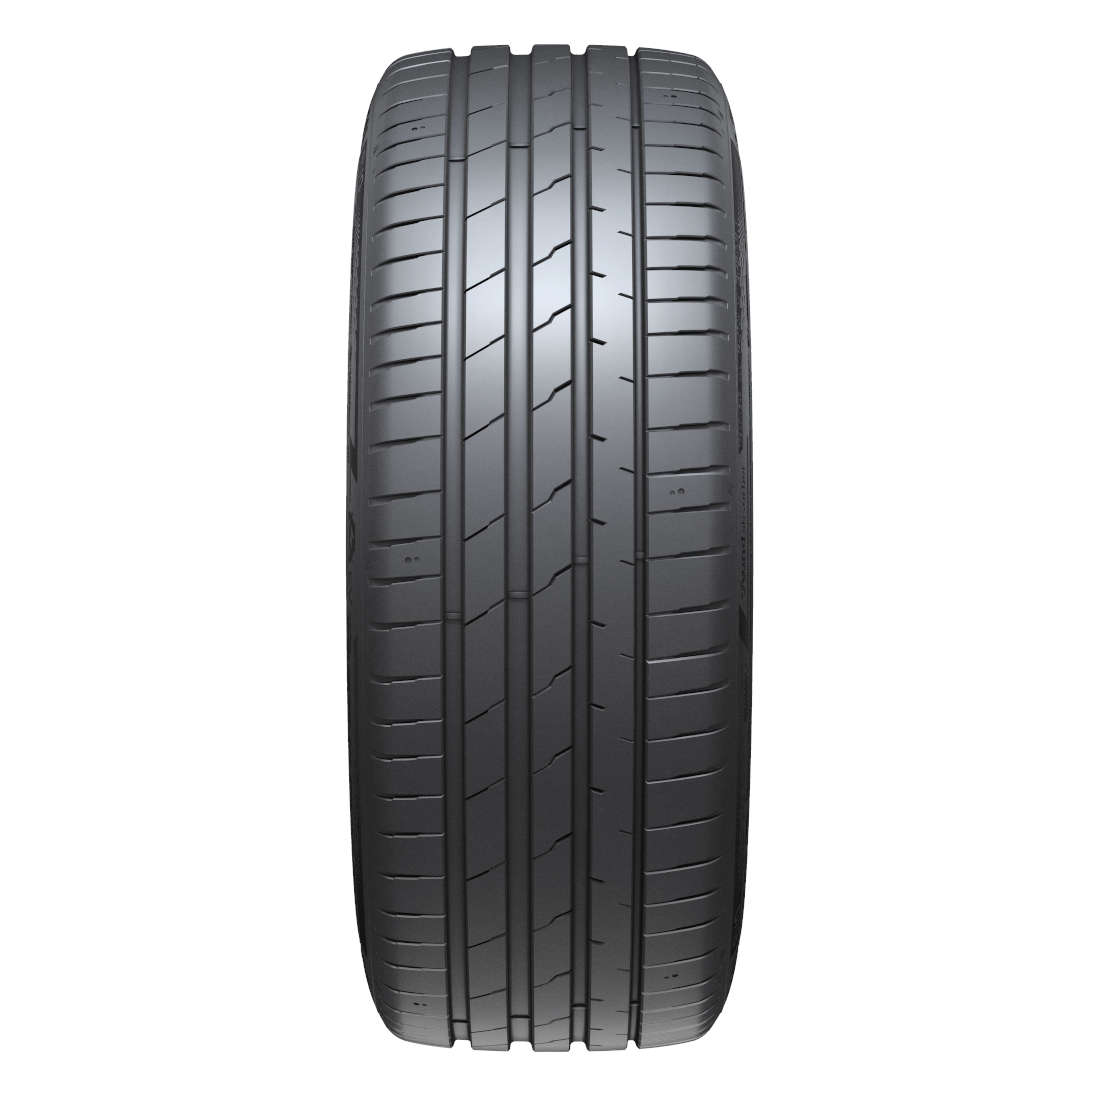 hankook, hankook tire malaysia, malaysia, hankook tire malaysia introduces ion evo and ventus prime 4 tyres